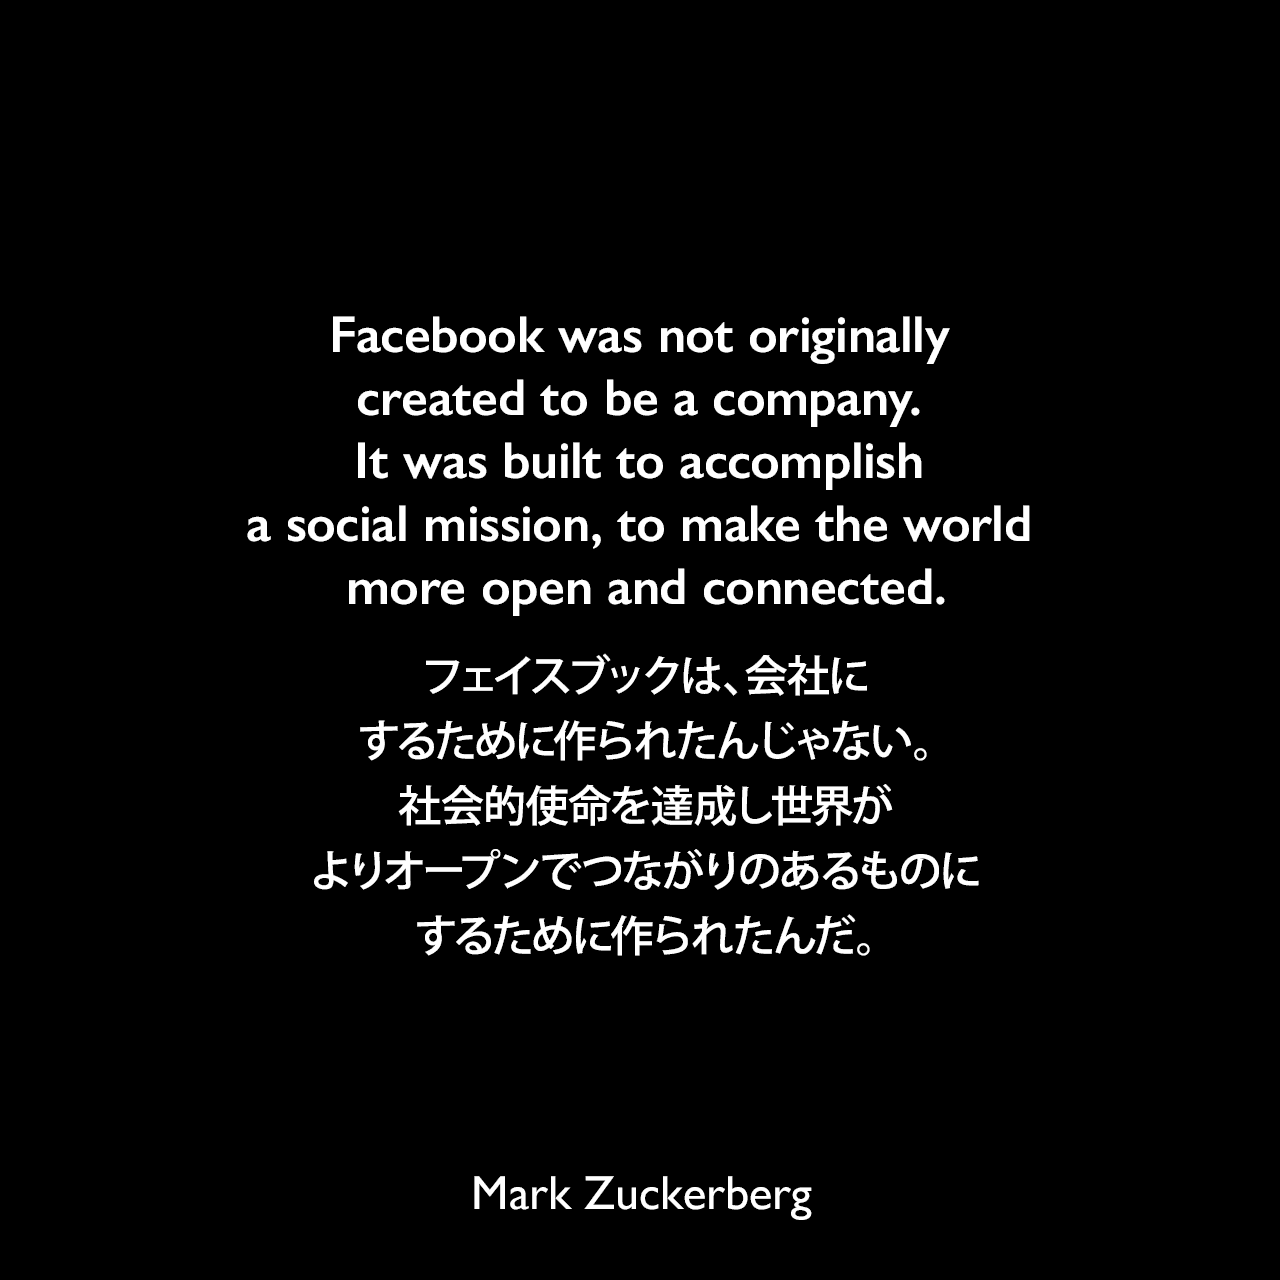 Facebook was not originally created to be a company. It was built to accomplish a social mission, to make the world more open and connected.フェイスブックは、会社にするために作られたんじゃない。社会的使命を達成し世界がよりオープンでつながりのあるものにするために作られたんだ。Mark Zuckerberg